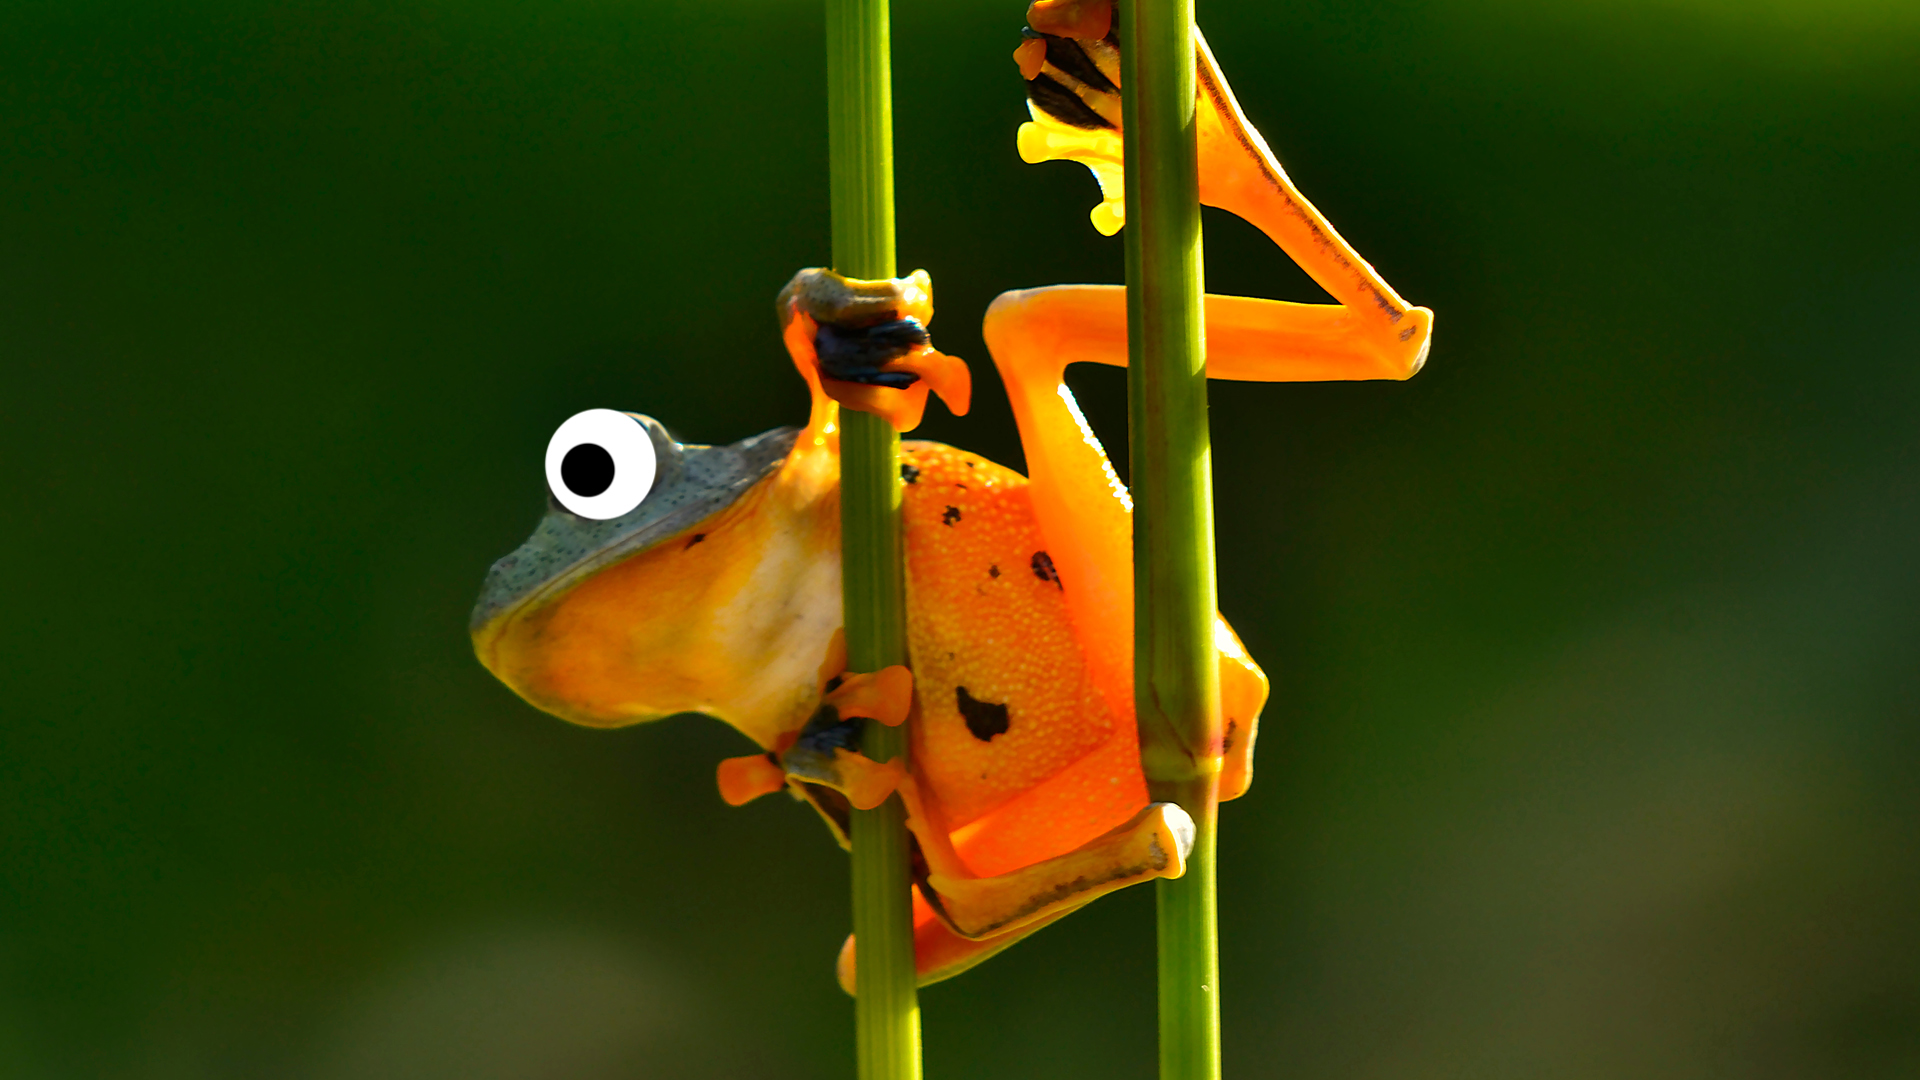 A flying frog prepares to leap from a branch